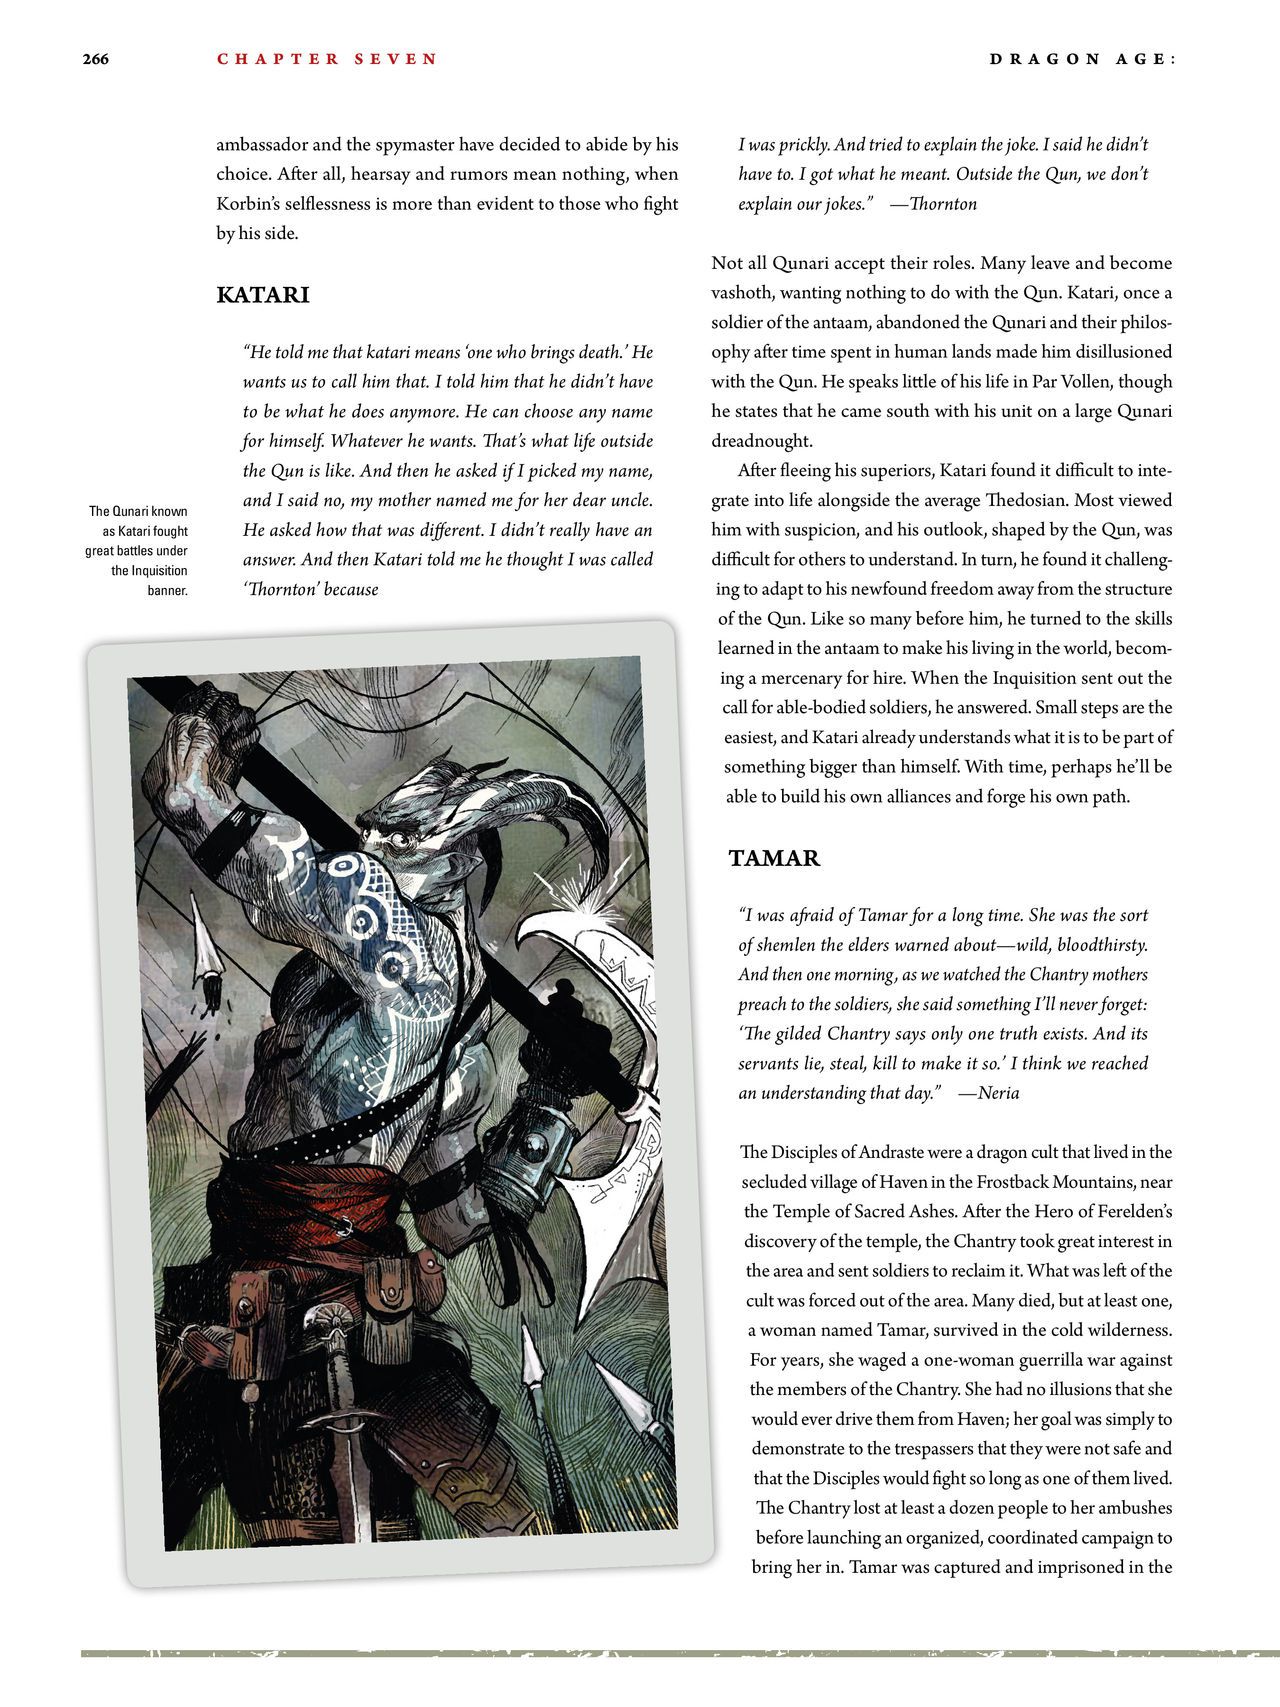 Dragon Age - The World of Thedas v02 259